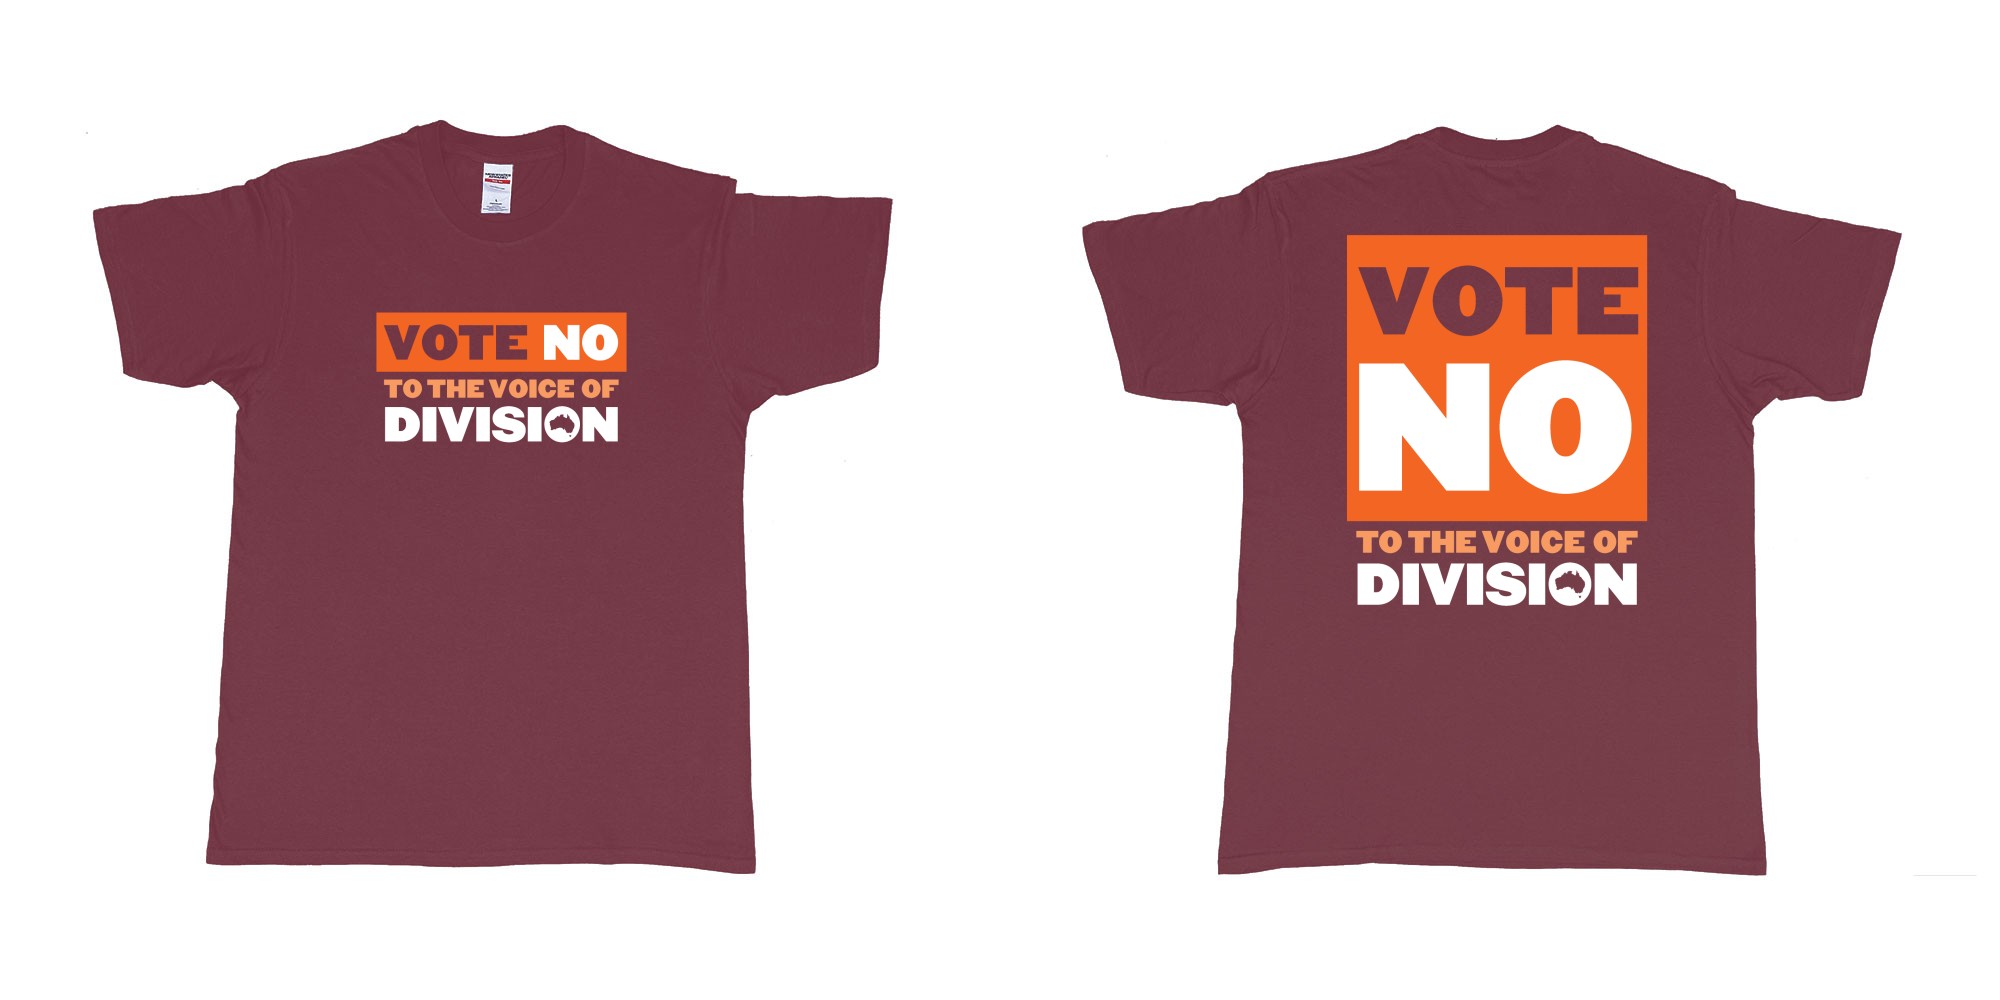 Custom tshirt design vote no to the voice of division australia in fabric color marron choice your own text made in Bali by The Pirate Way